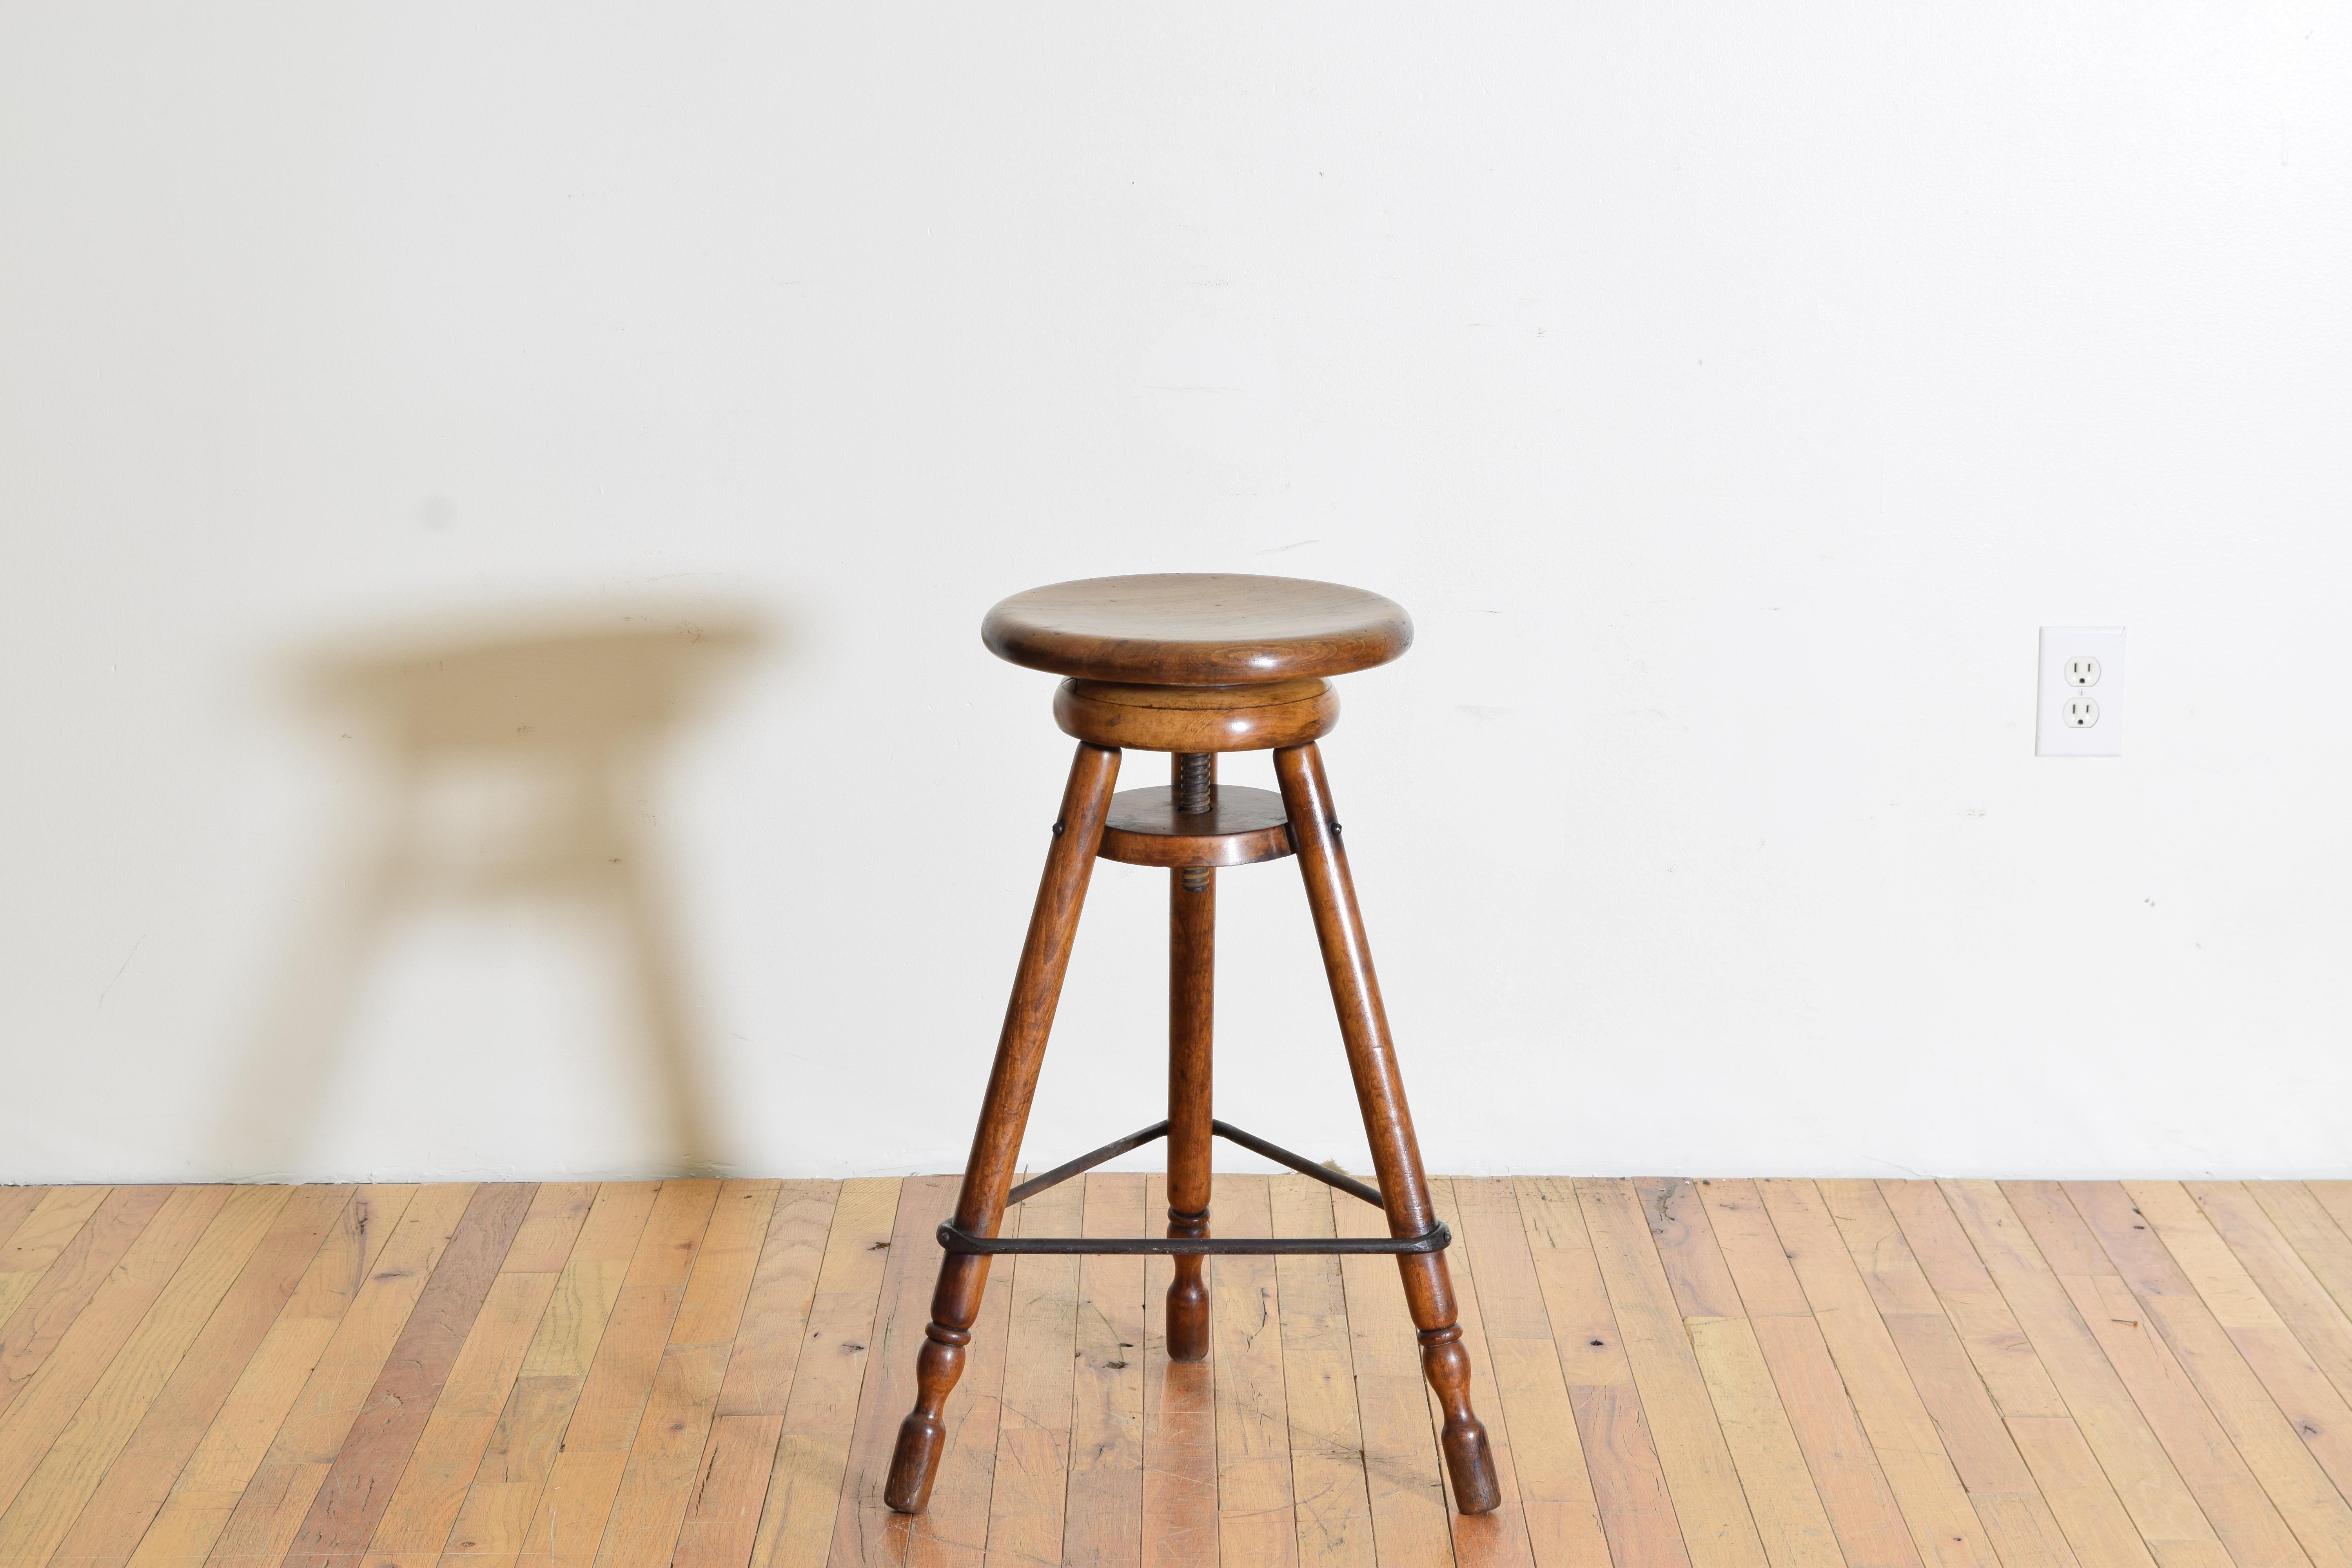 Constructed entirely of solid walnut and having a rotating slightly concave circular seat atop an adjustable down rod supported by three legs braced in iron and ending on uniquely shaped feet, height measured to lowest possible setting, diameter is